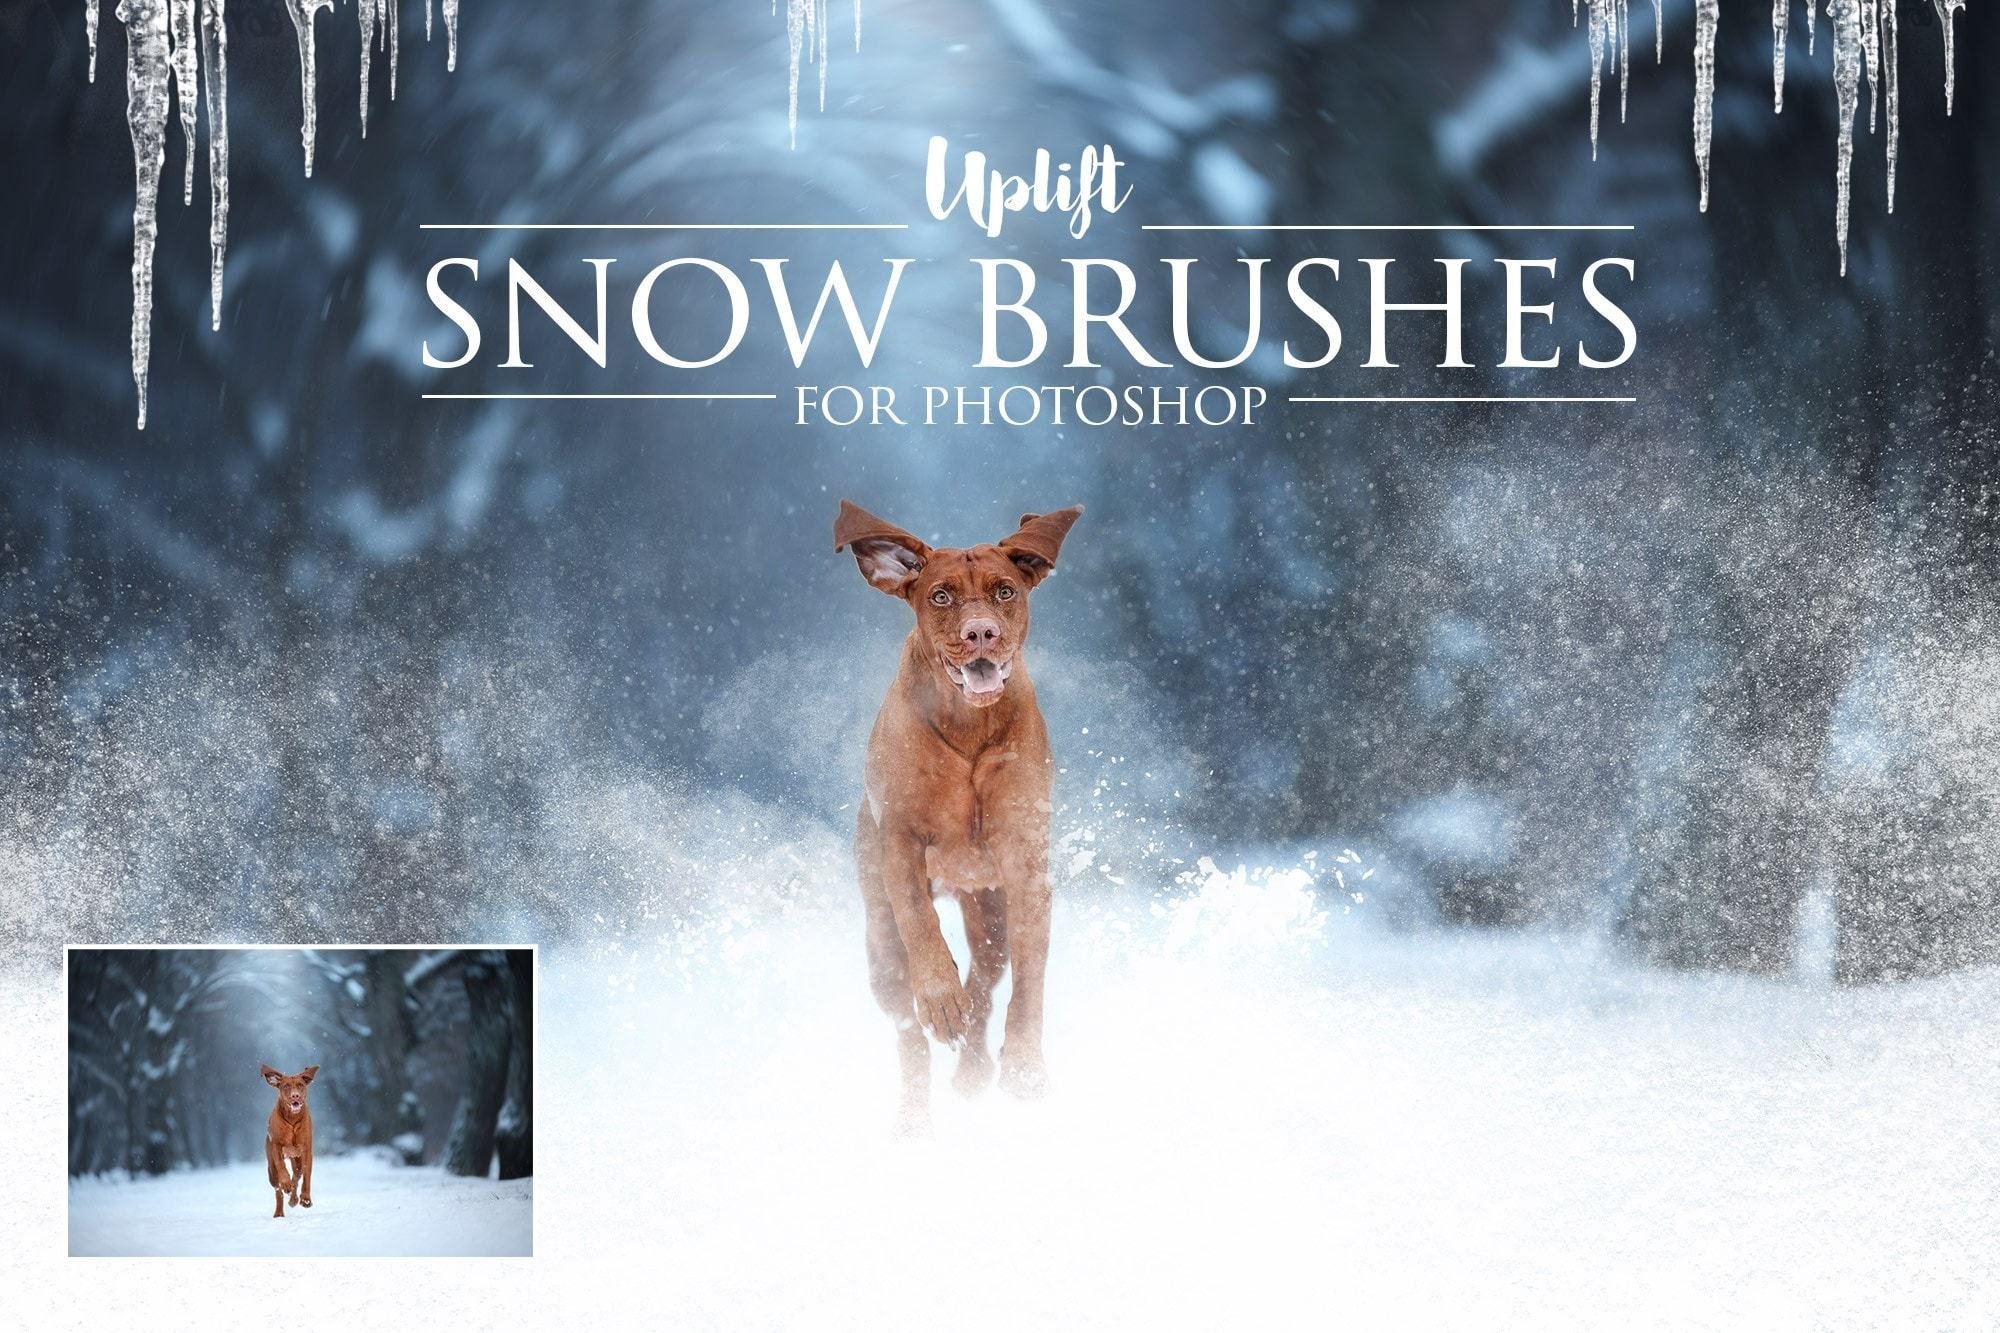 snowbrushes cover 2048x 485